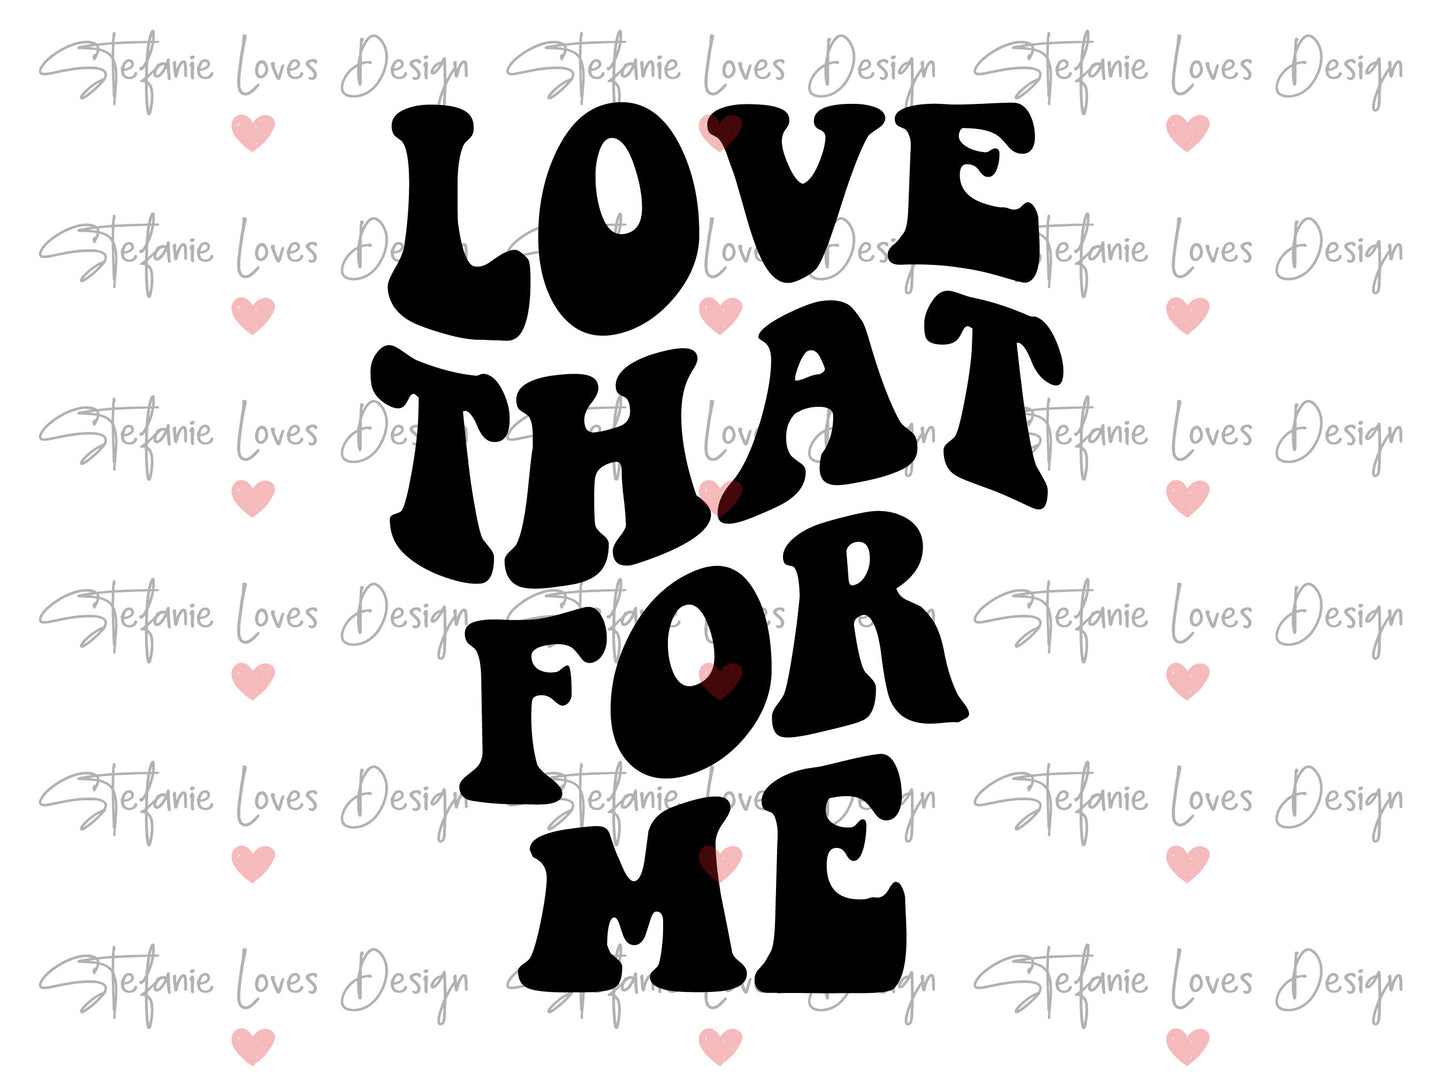 Love That For Me SVG, Wavy Letter, Retro Love That For You, Digital Design